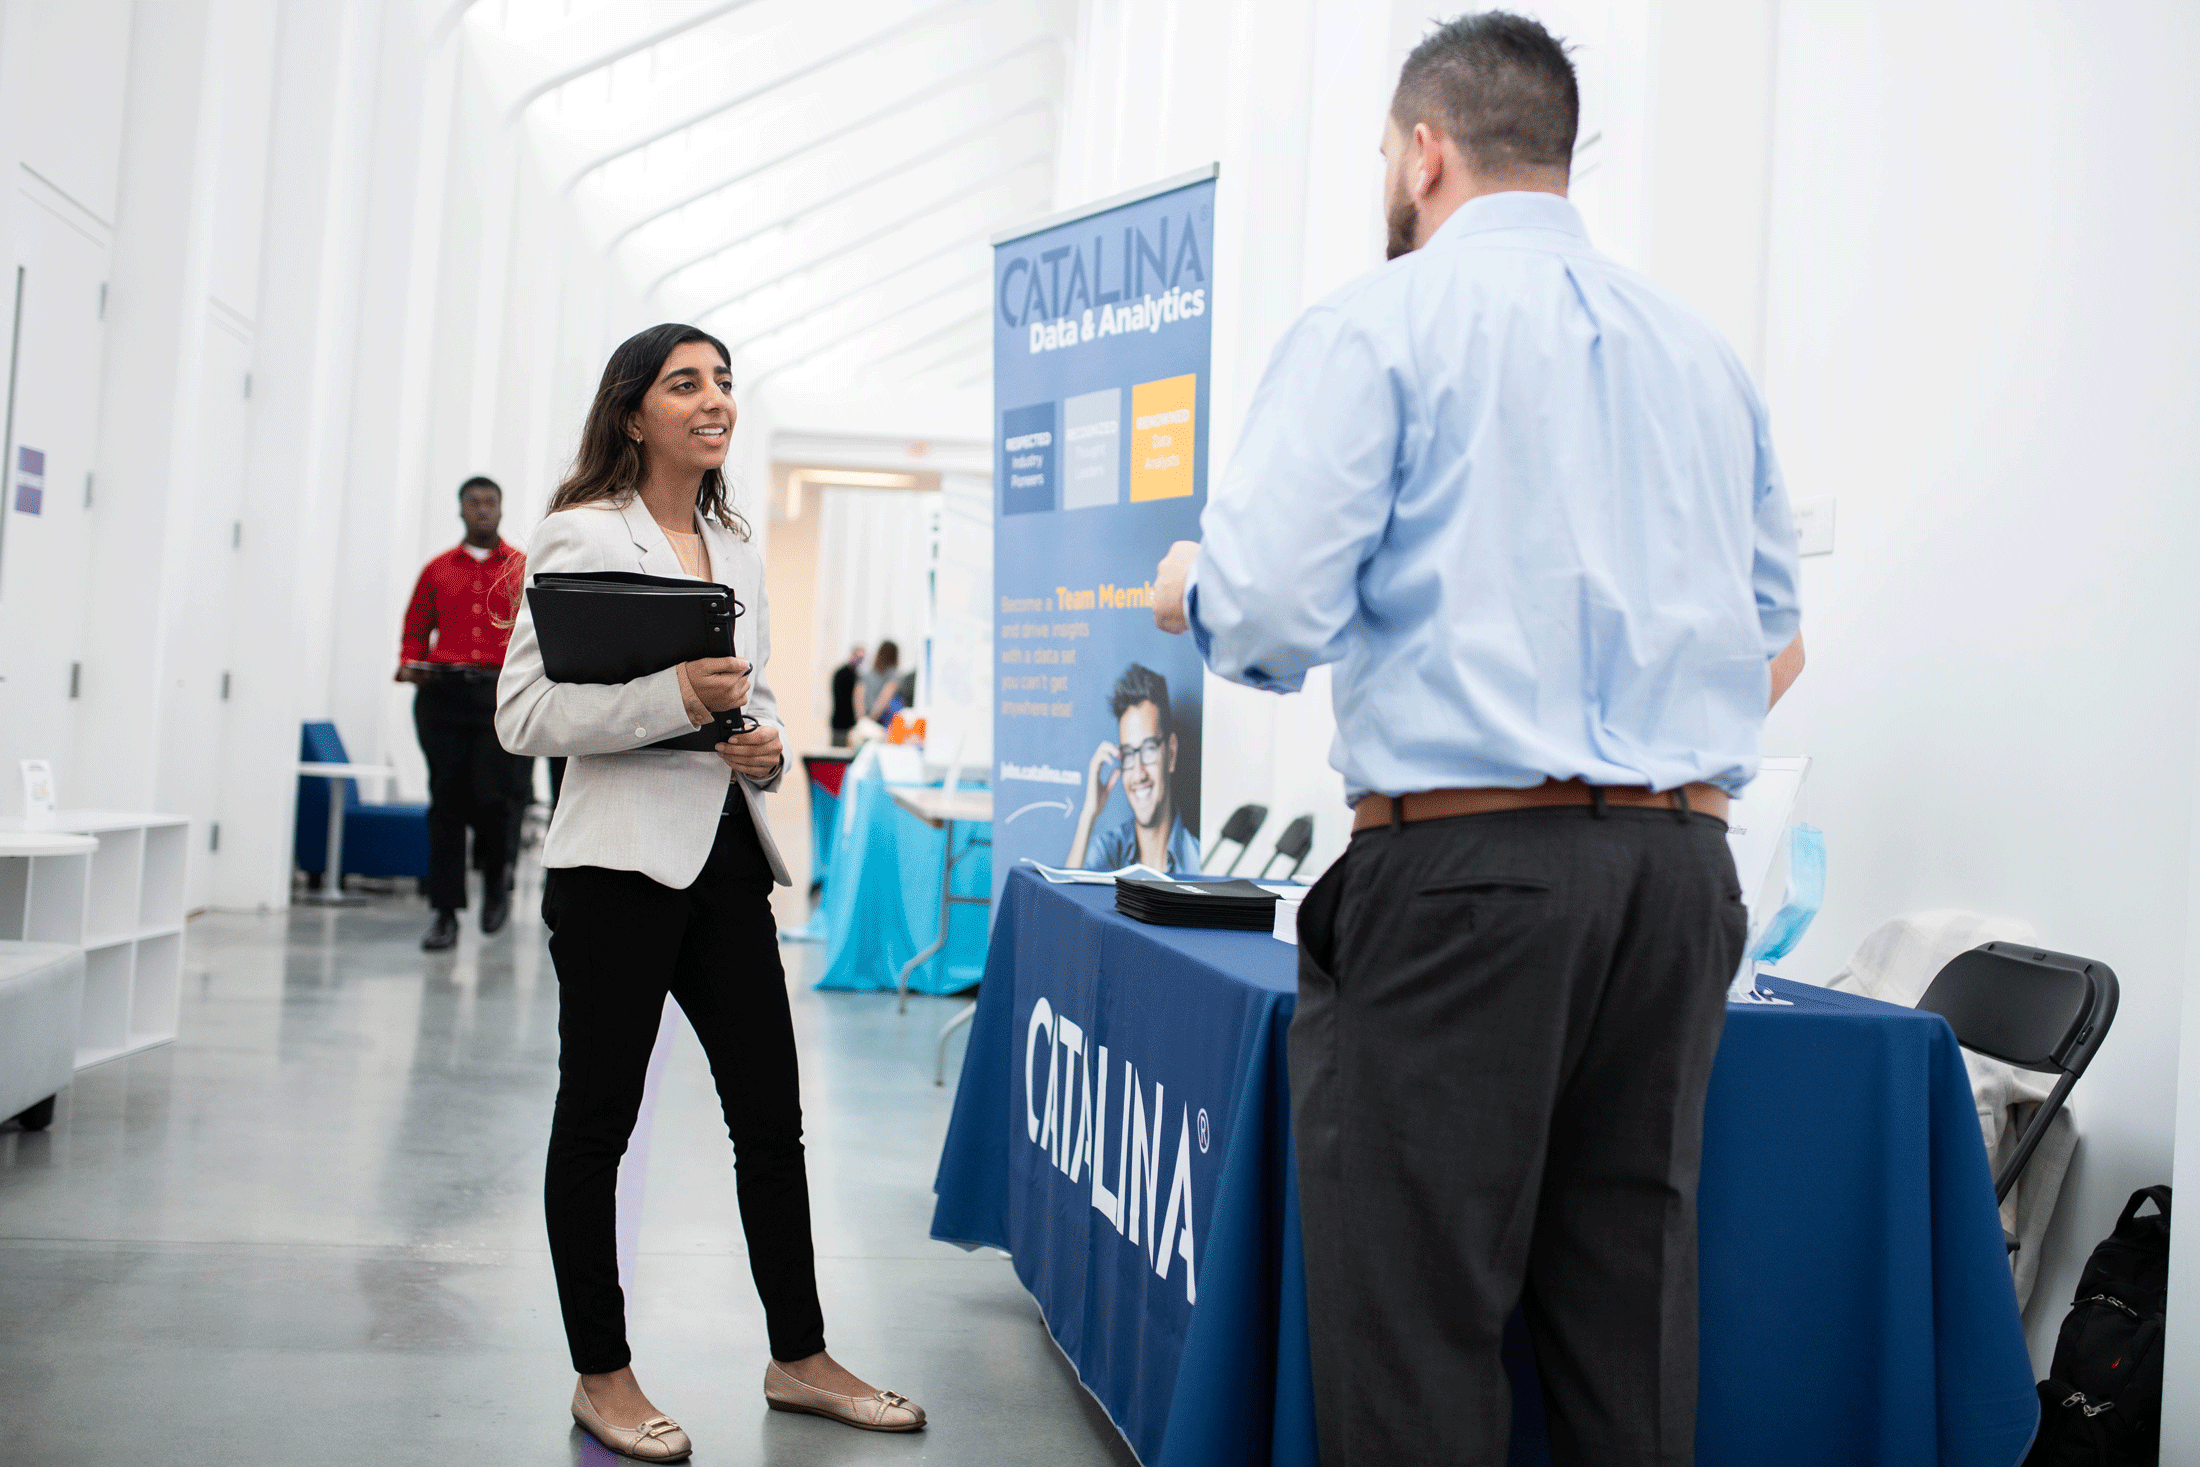 A student speaks to a company representative during Florida Poly's Career and Internship Fair.